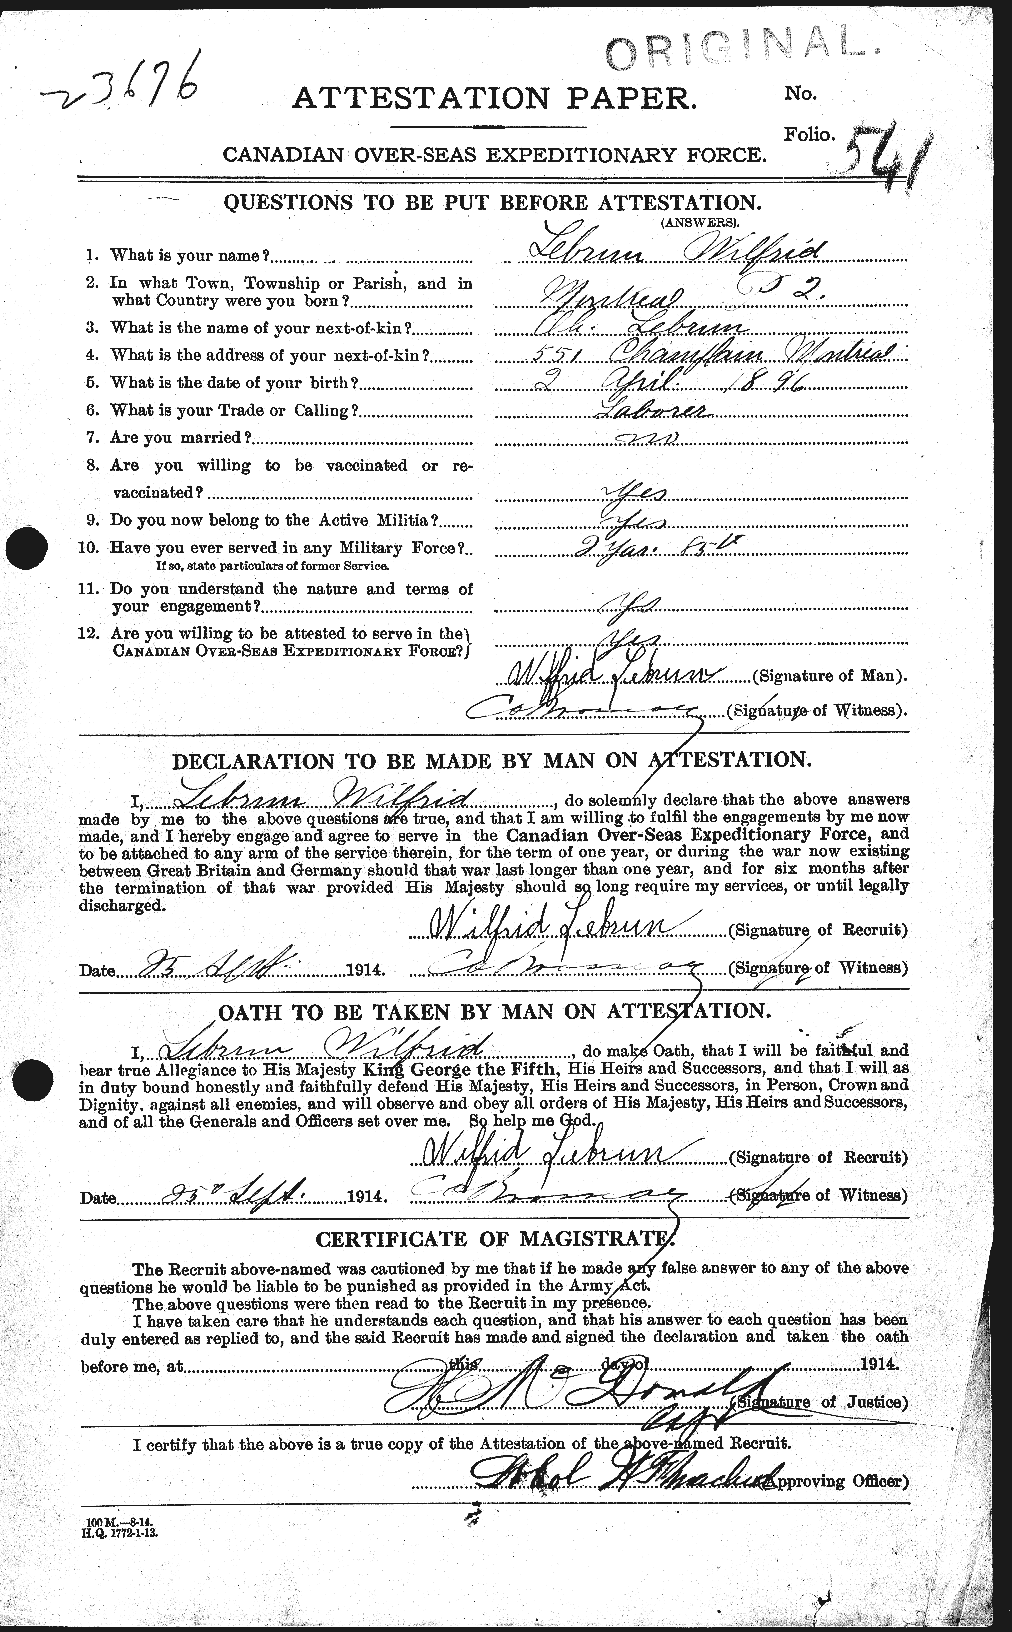 Personnel Records of the First World War - CEF 461593a